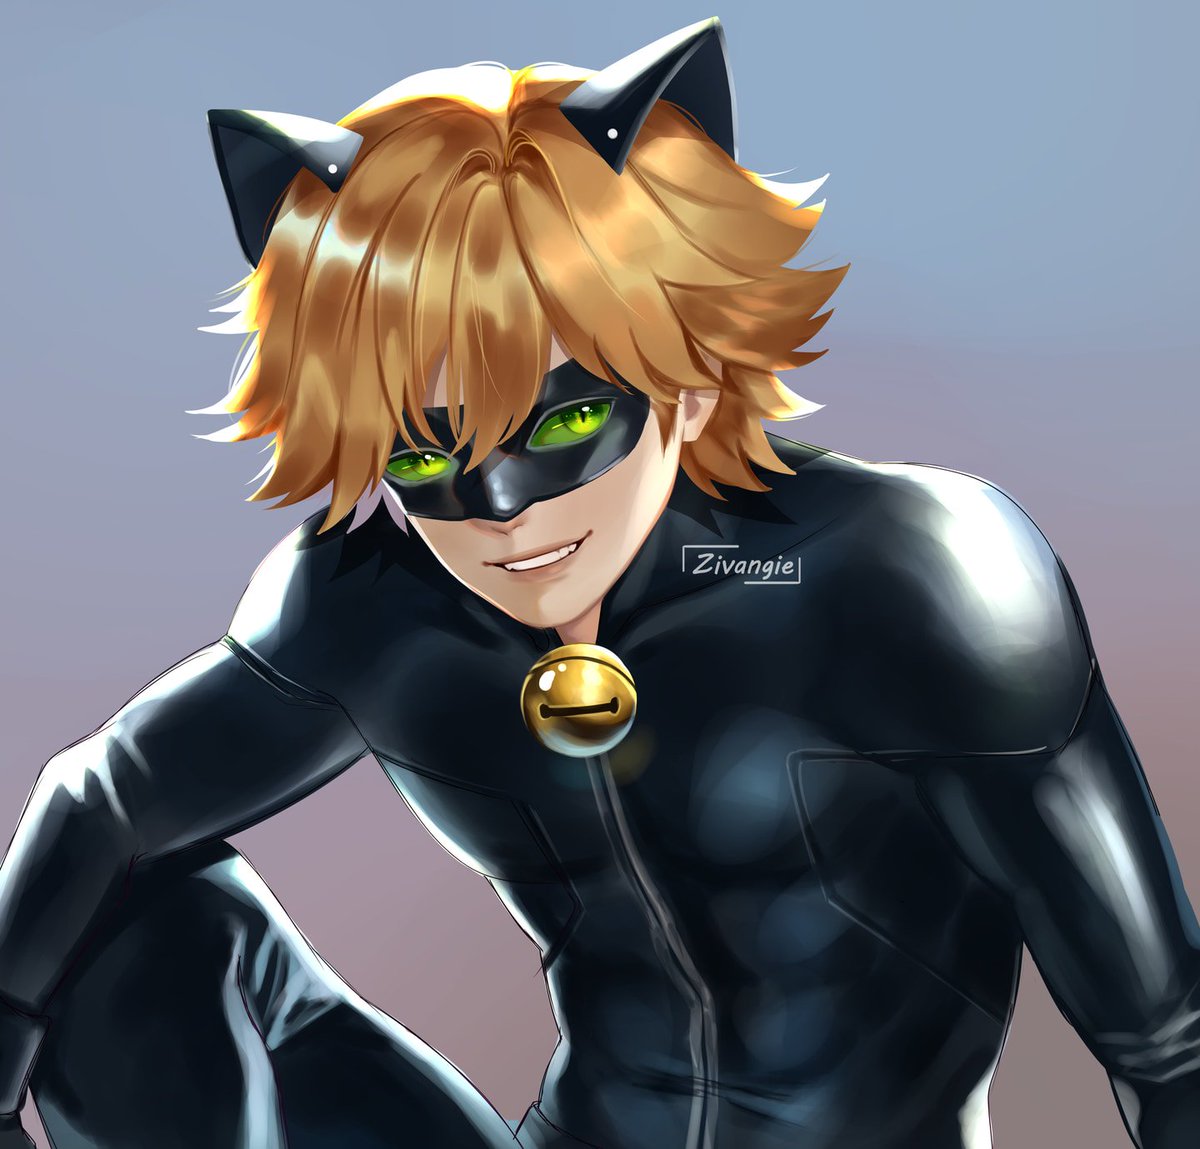 How to draw Cat Noir | Ladybug coloring page, Easy drawings, Cat drawing